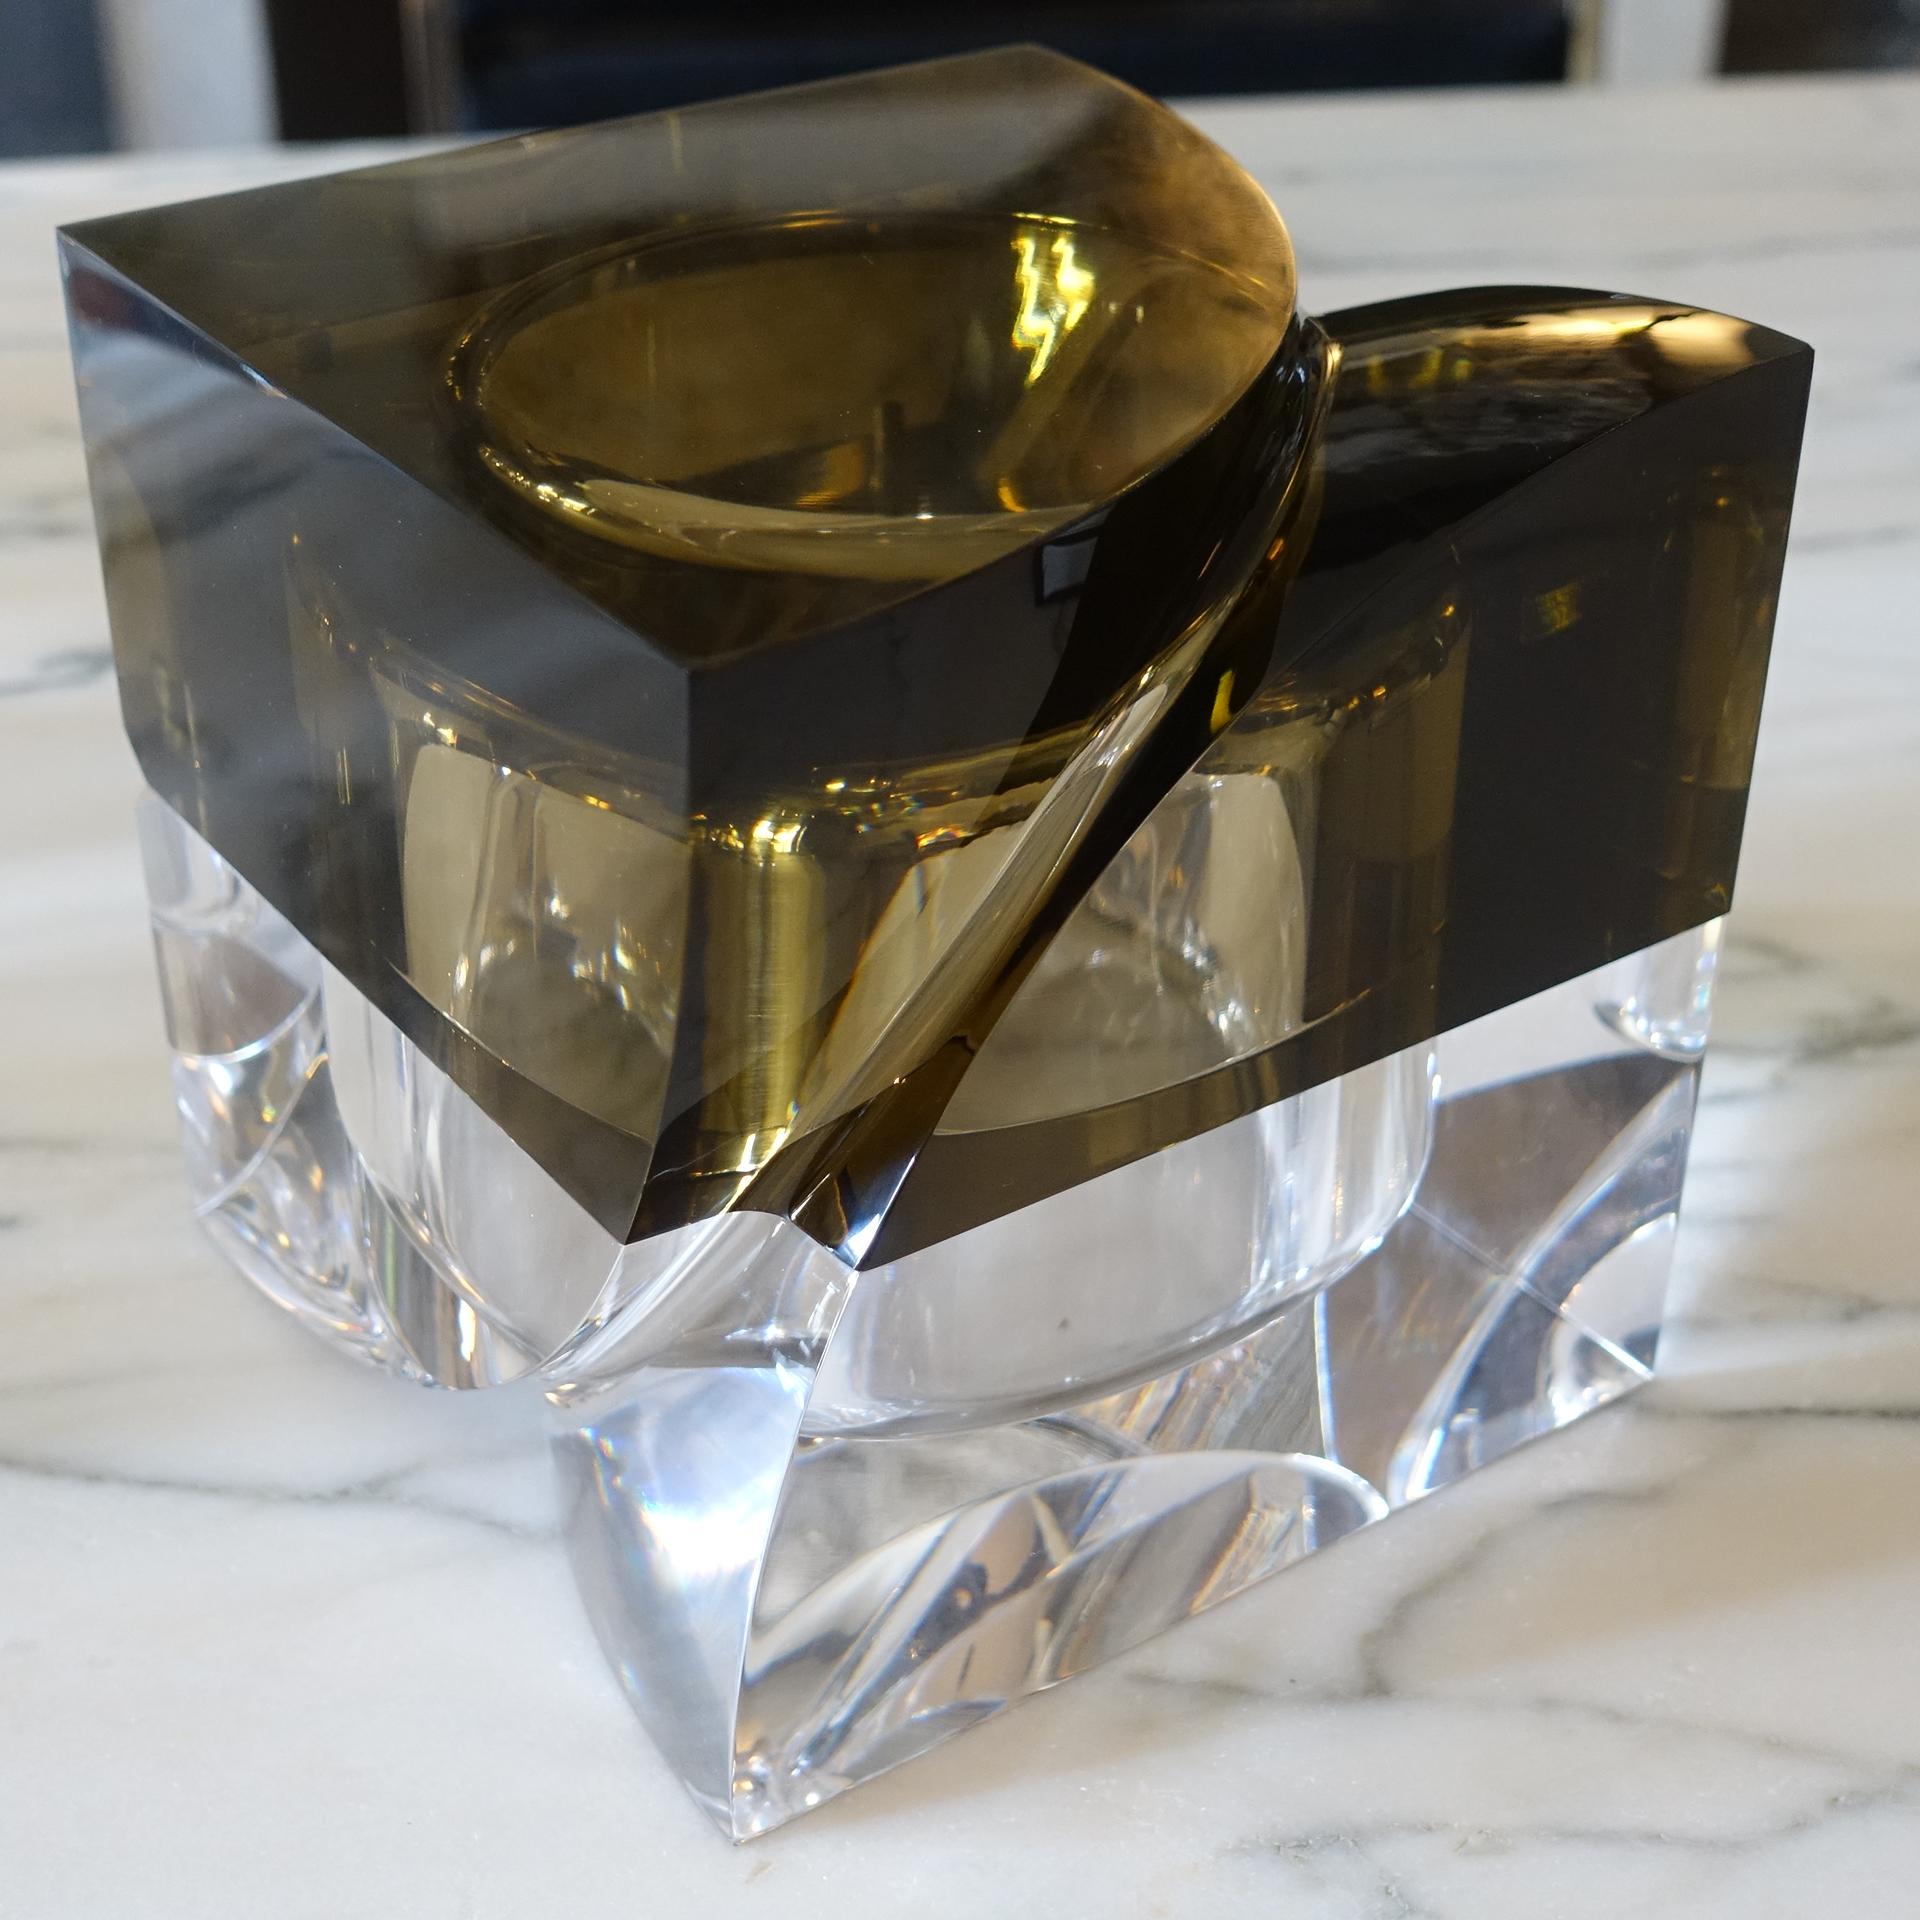 Plexiglass Flair Edition Big Decorative Box in Amber and Clear Lucite, Italy, 2021 For Sale